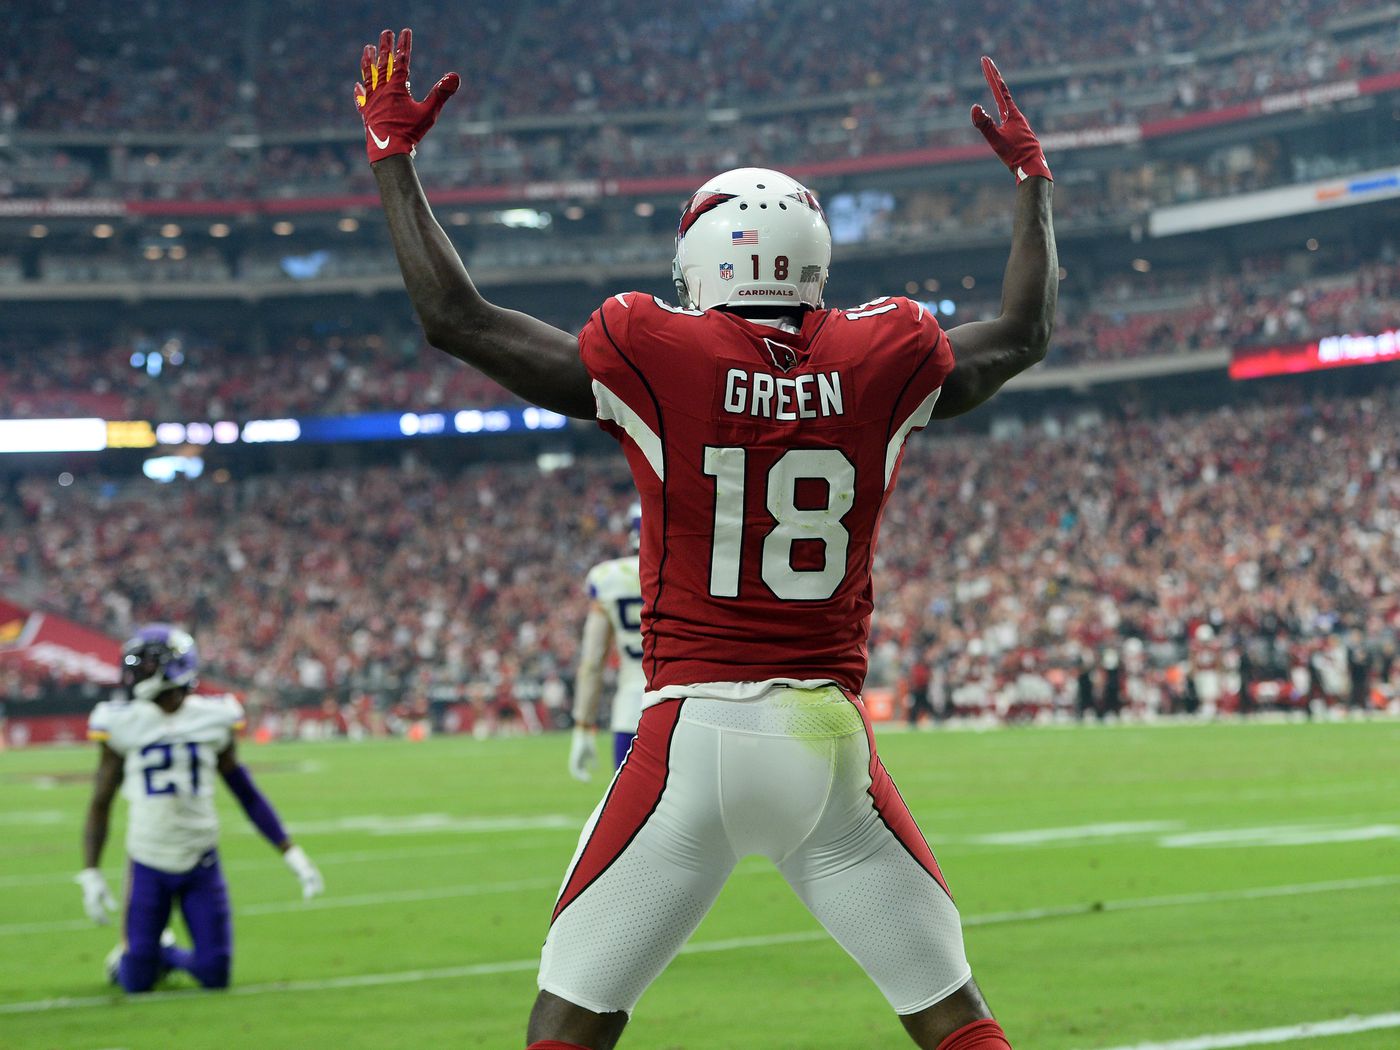 AJ Green had a decent season with the Cardinals in 2021